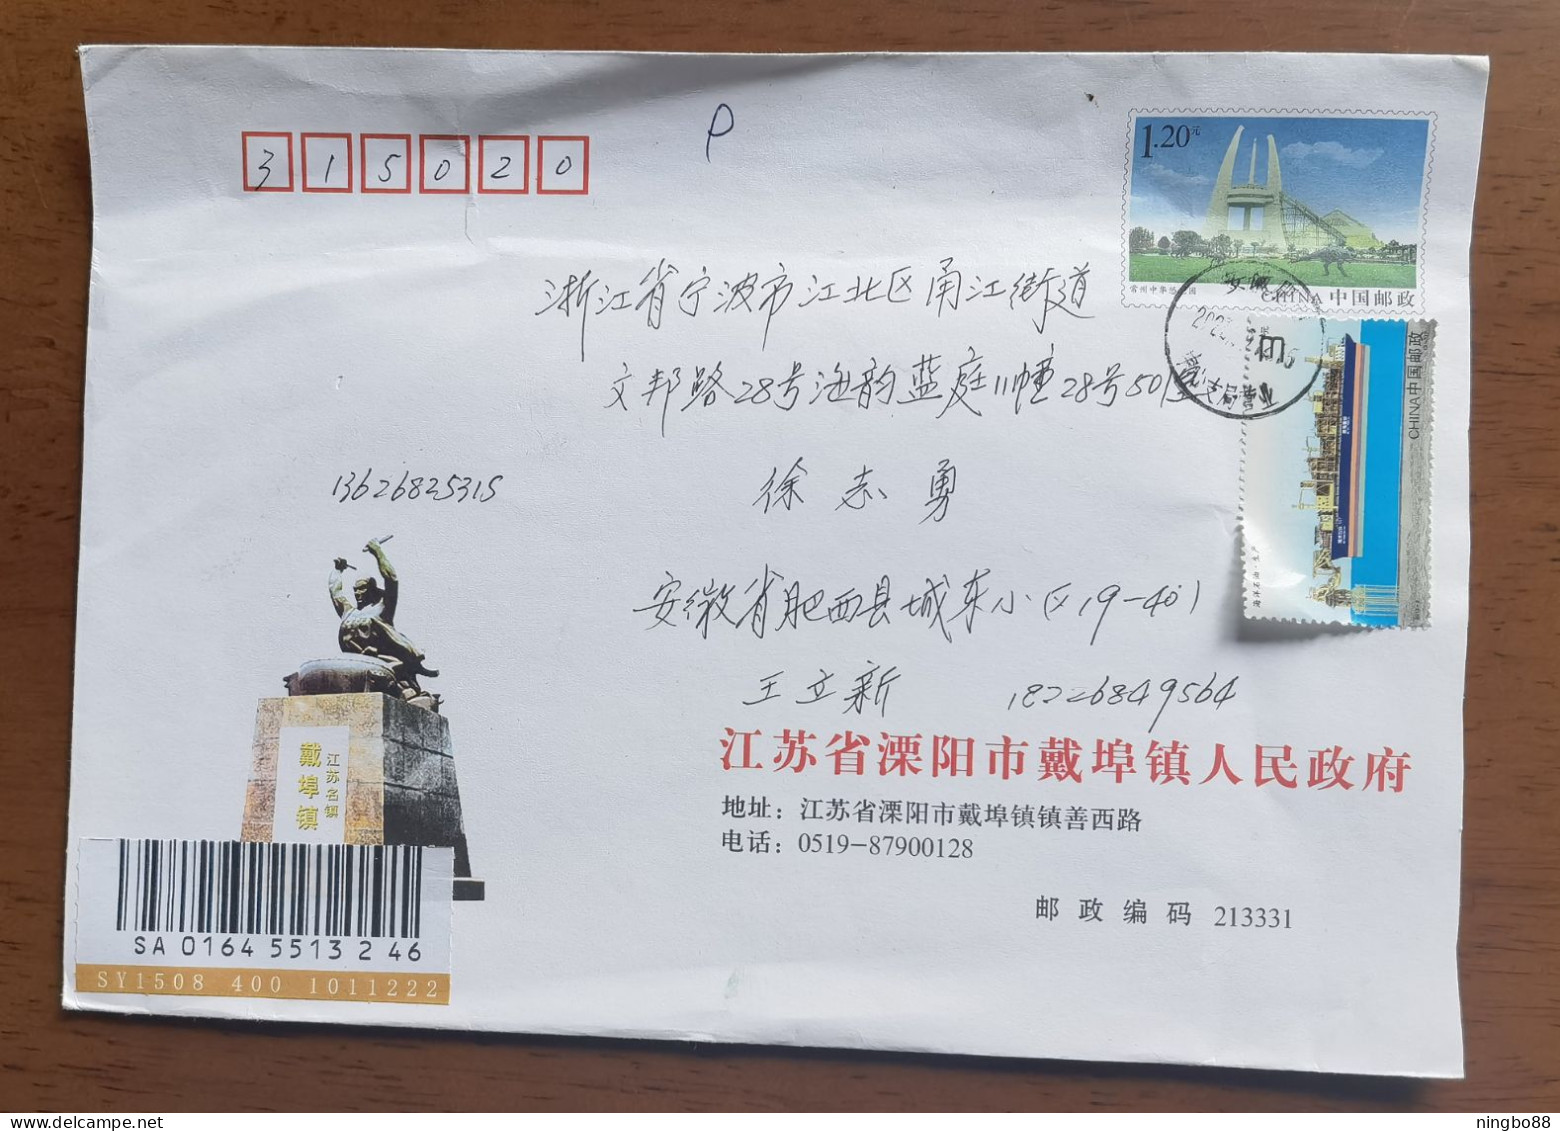 China 2007 Changzhou Chinese Dinosaur Park Postal Stationery Envelop In Postally Used - Fossils